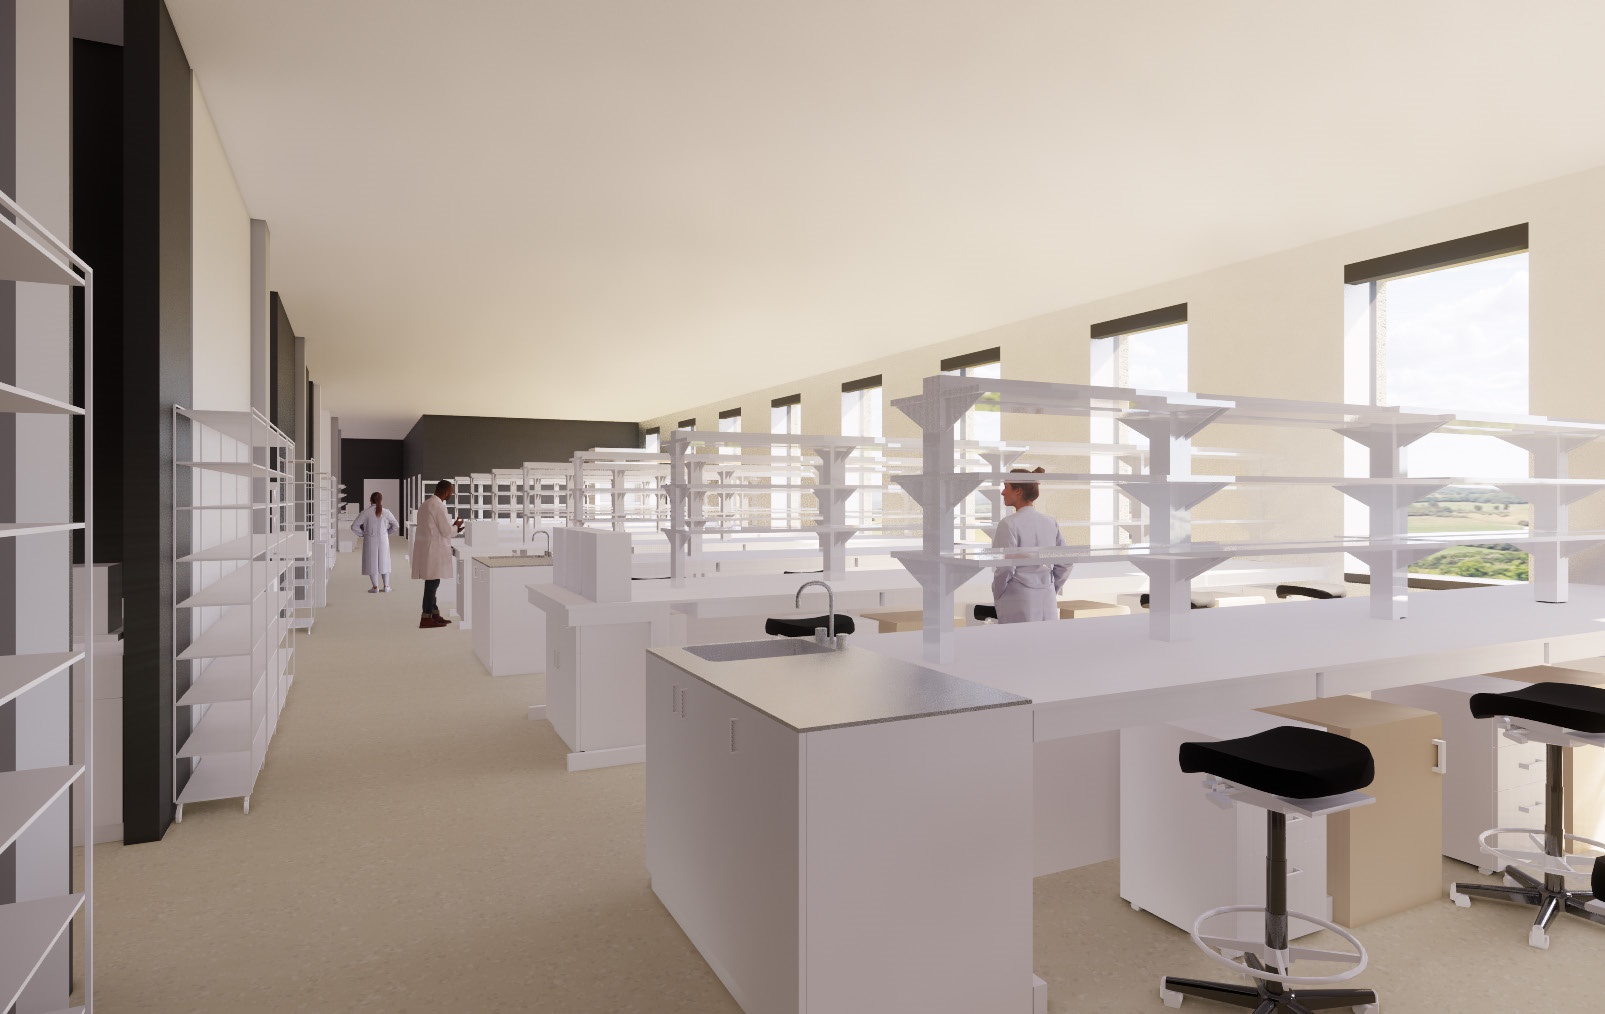 Architect's rendering of a typical open laboratory inside the Life and Mind Building.